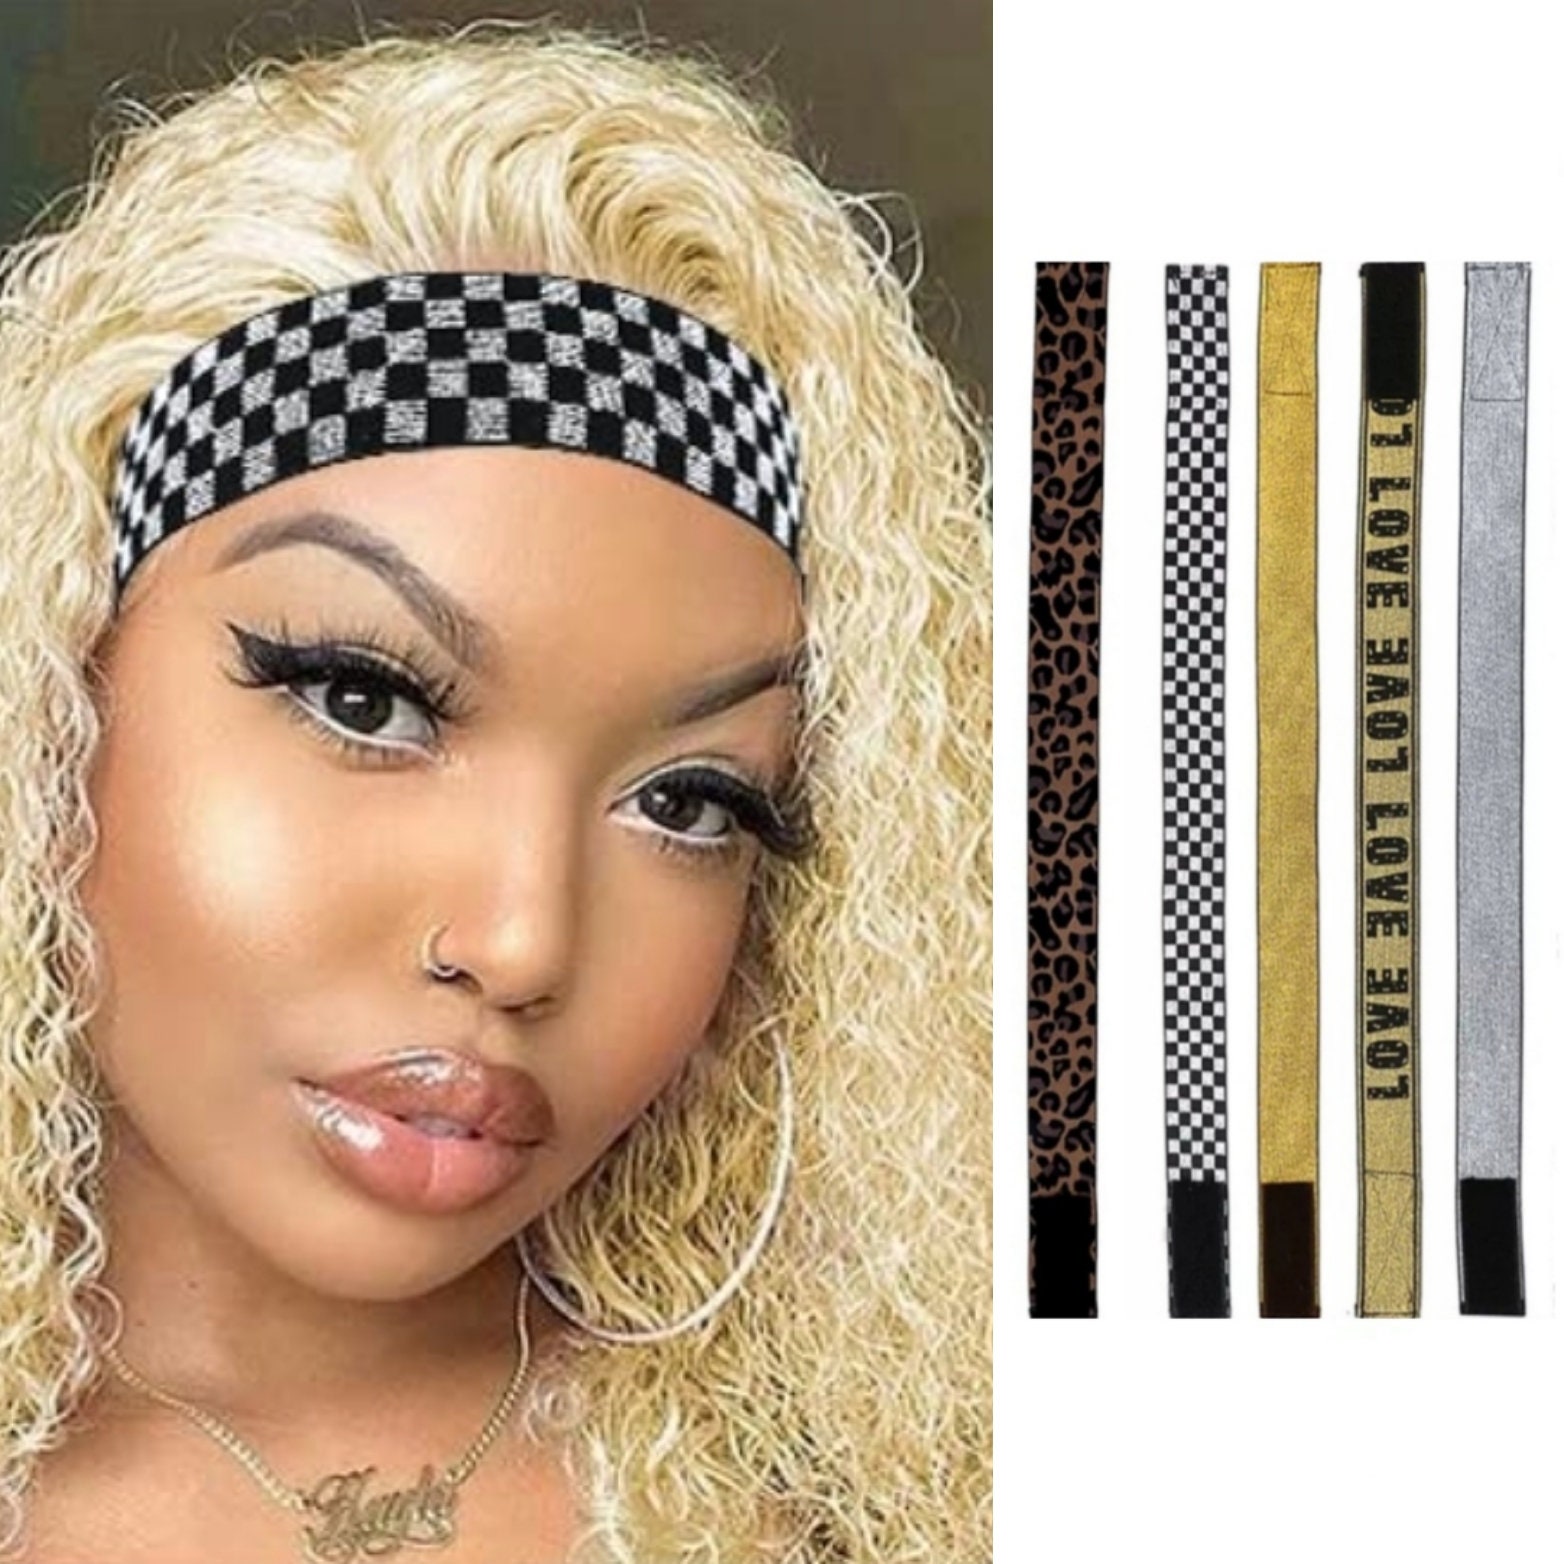 30pcs Elastic Bands for Wig Edges, Adjustable Wig Bands for Wigs and Wig Caps, Adjustable Wig Straps for Keeping Wigs in Place, Secure Wig Band for